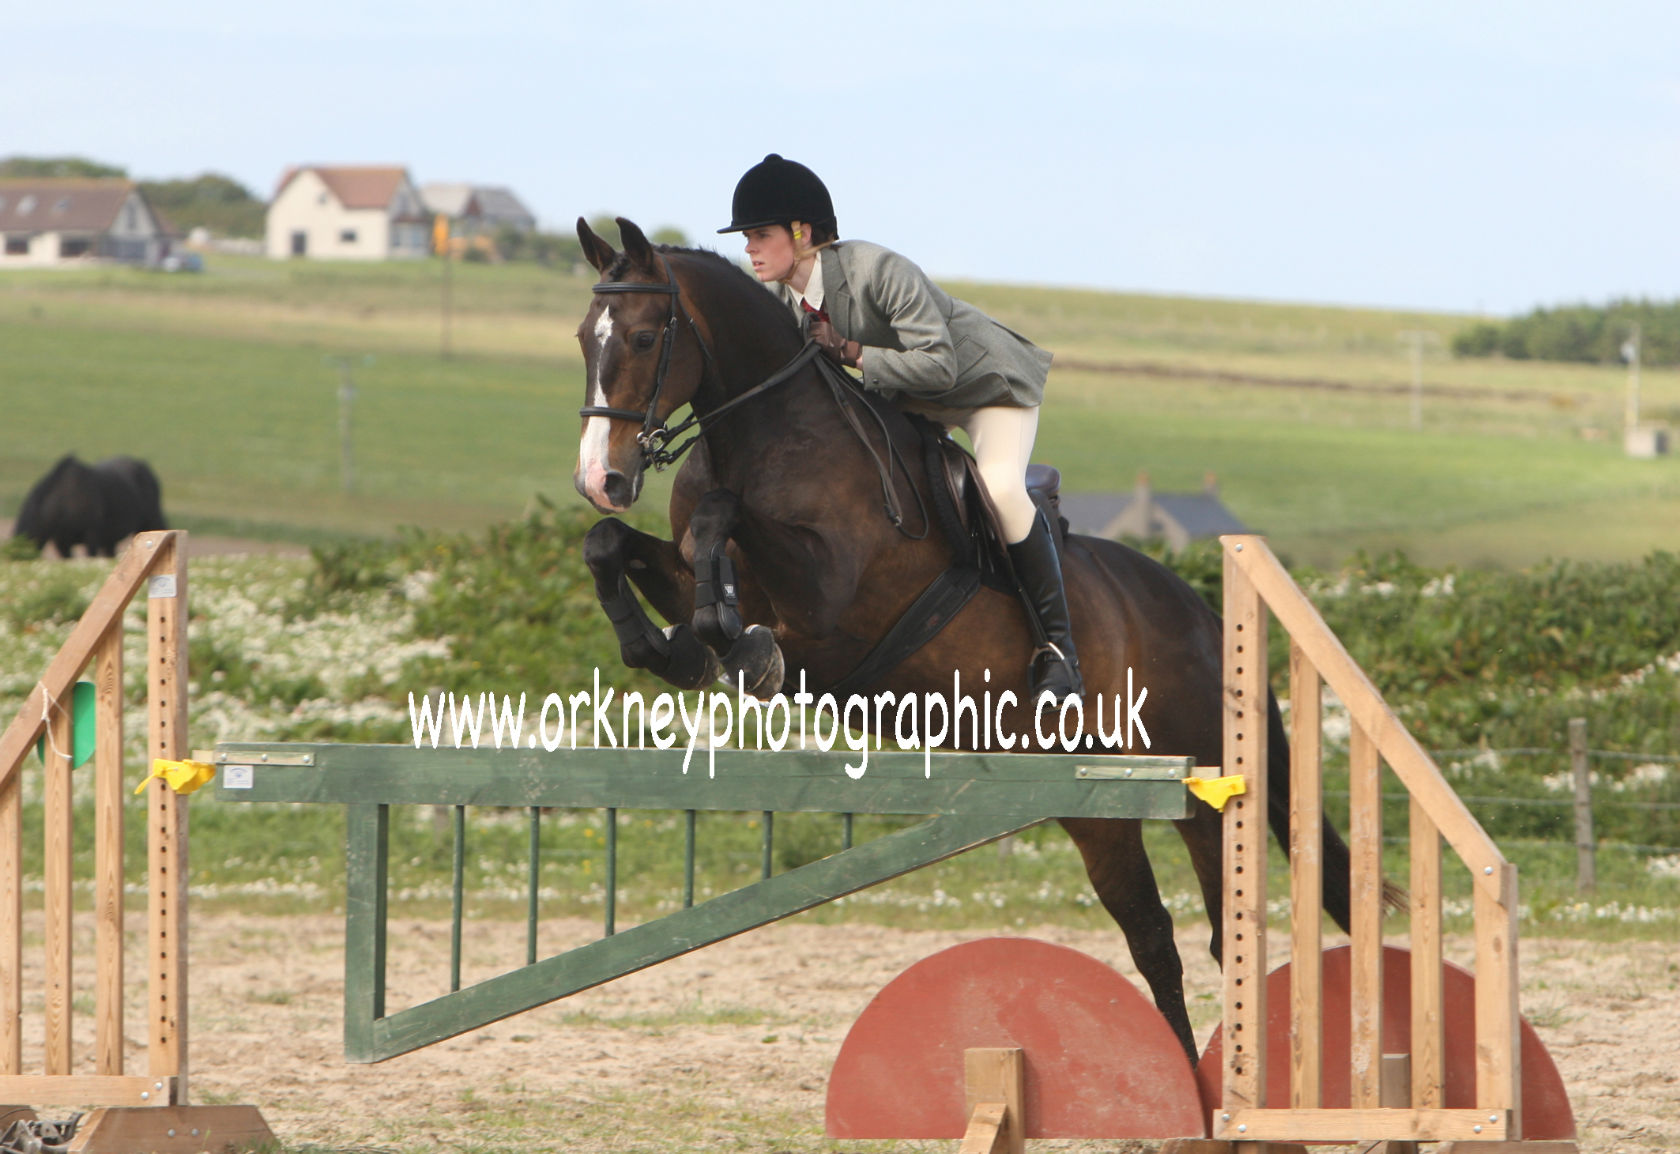 Jo Donaldson on Woodlands Bay at the Orkney Riding club show. more photographs on www.orkneyphotographic.co.uk